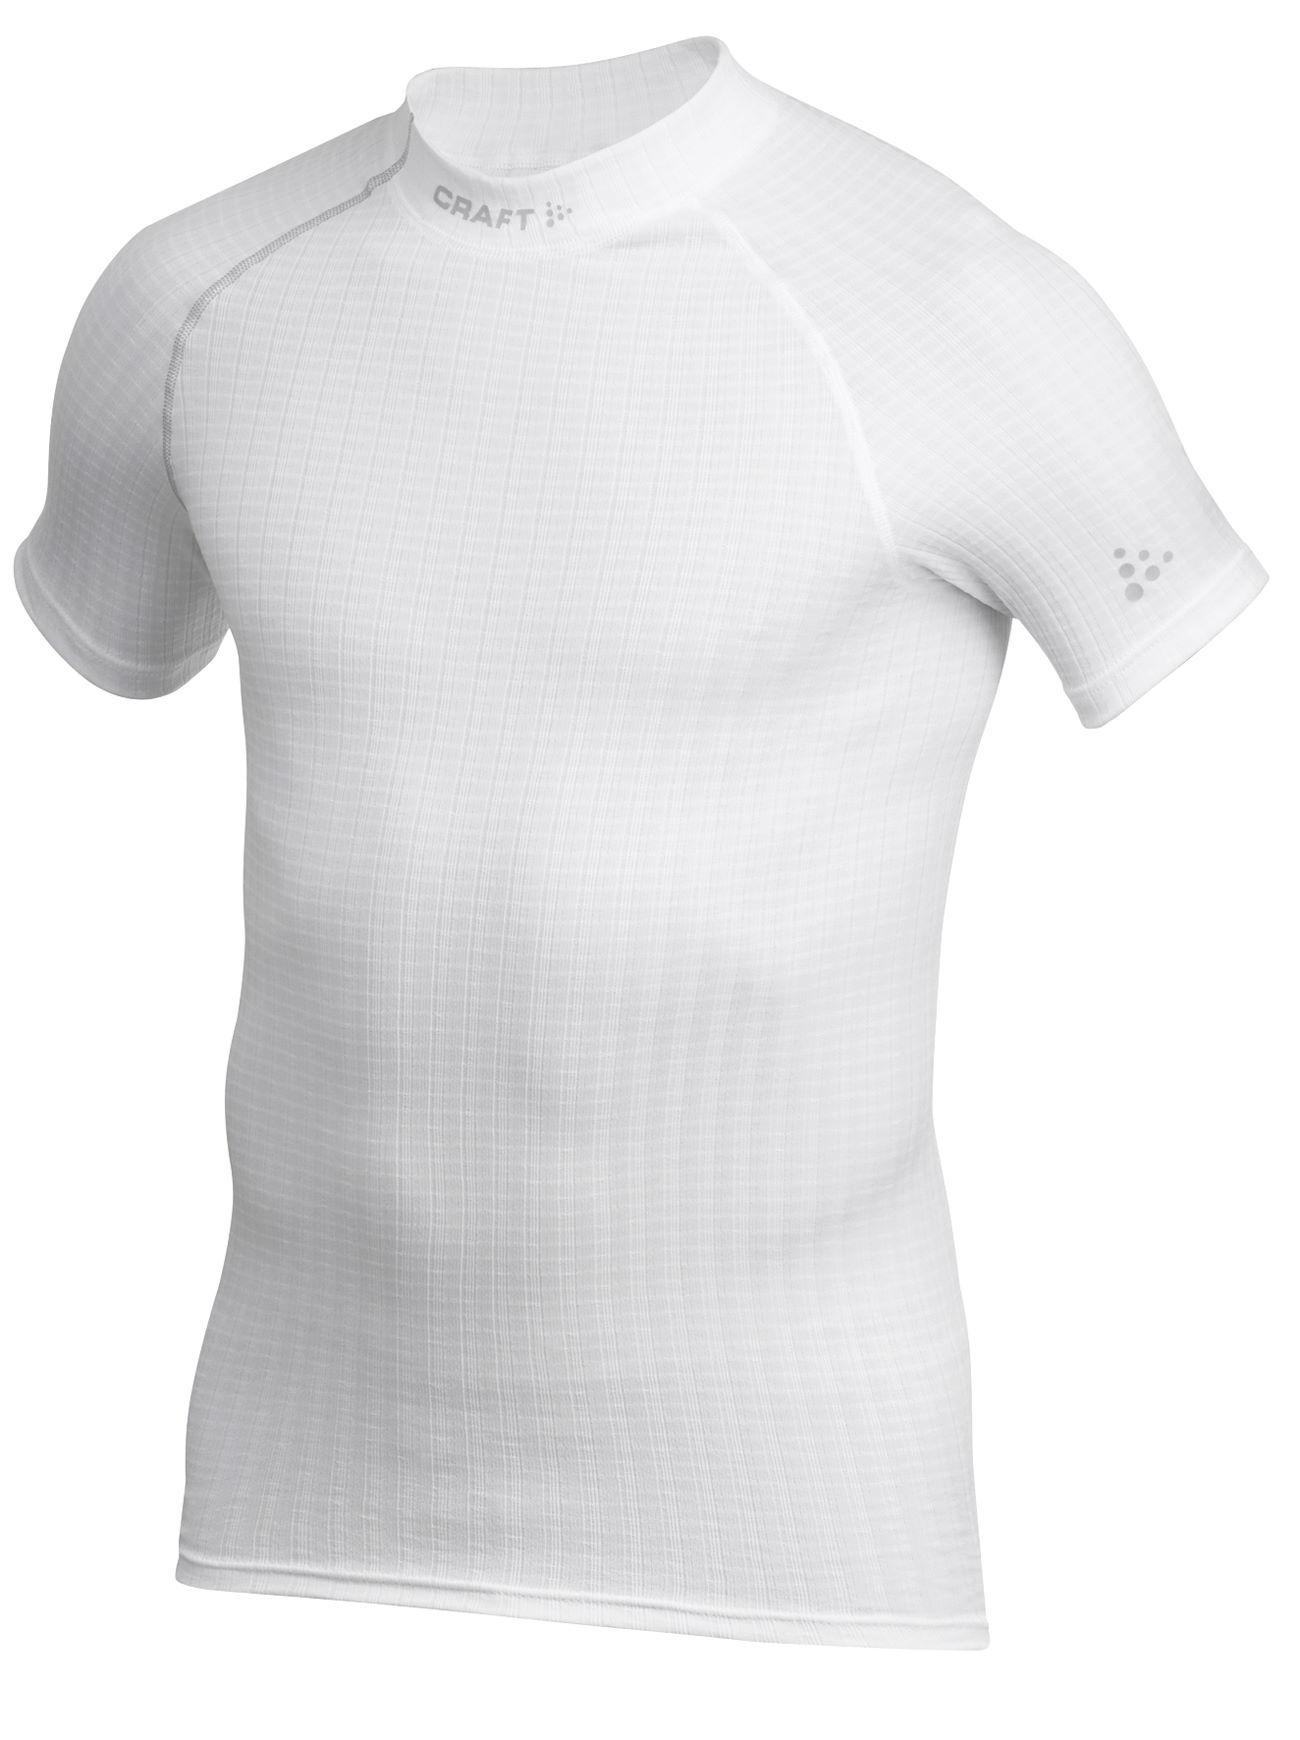 Craft Active Extreme Cn Ss Base Layer - White